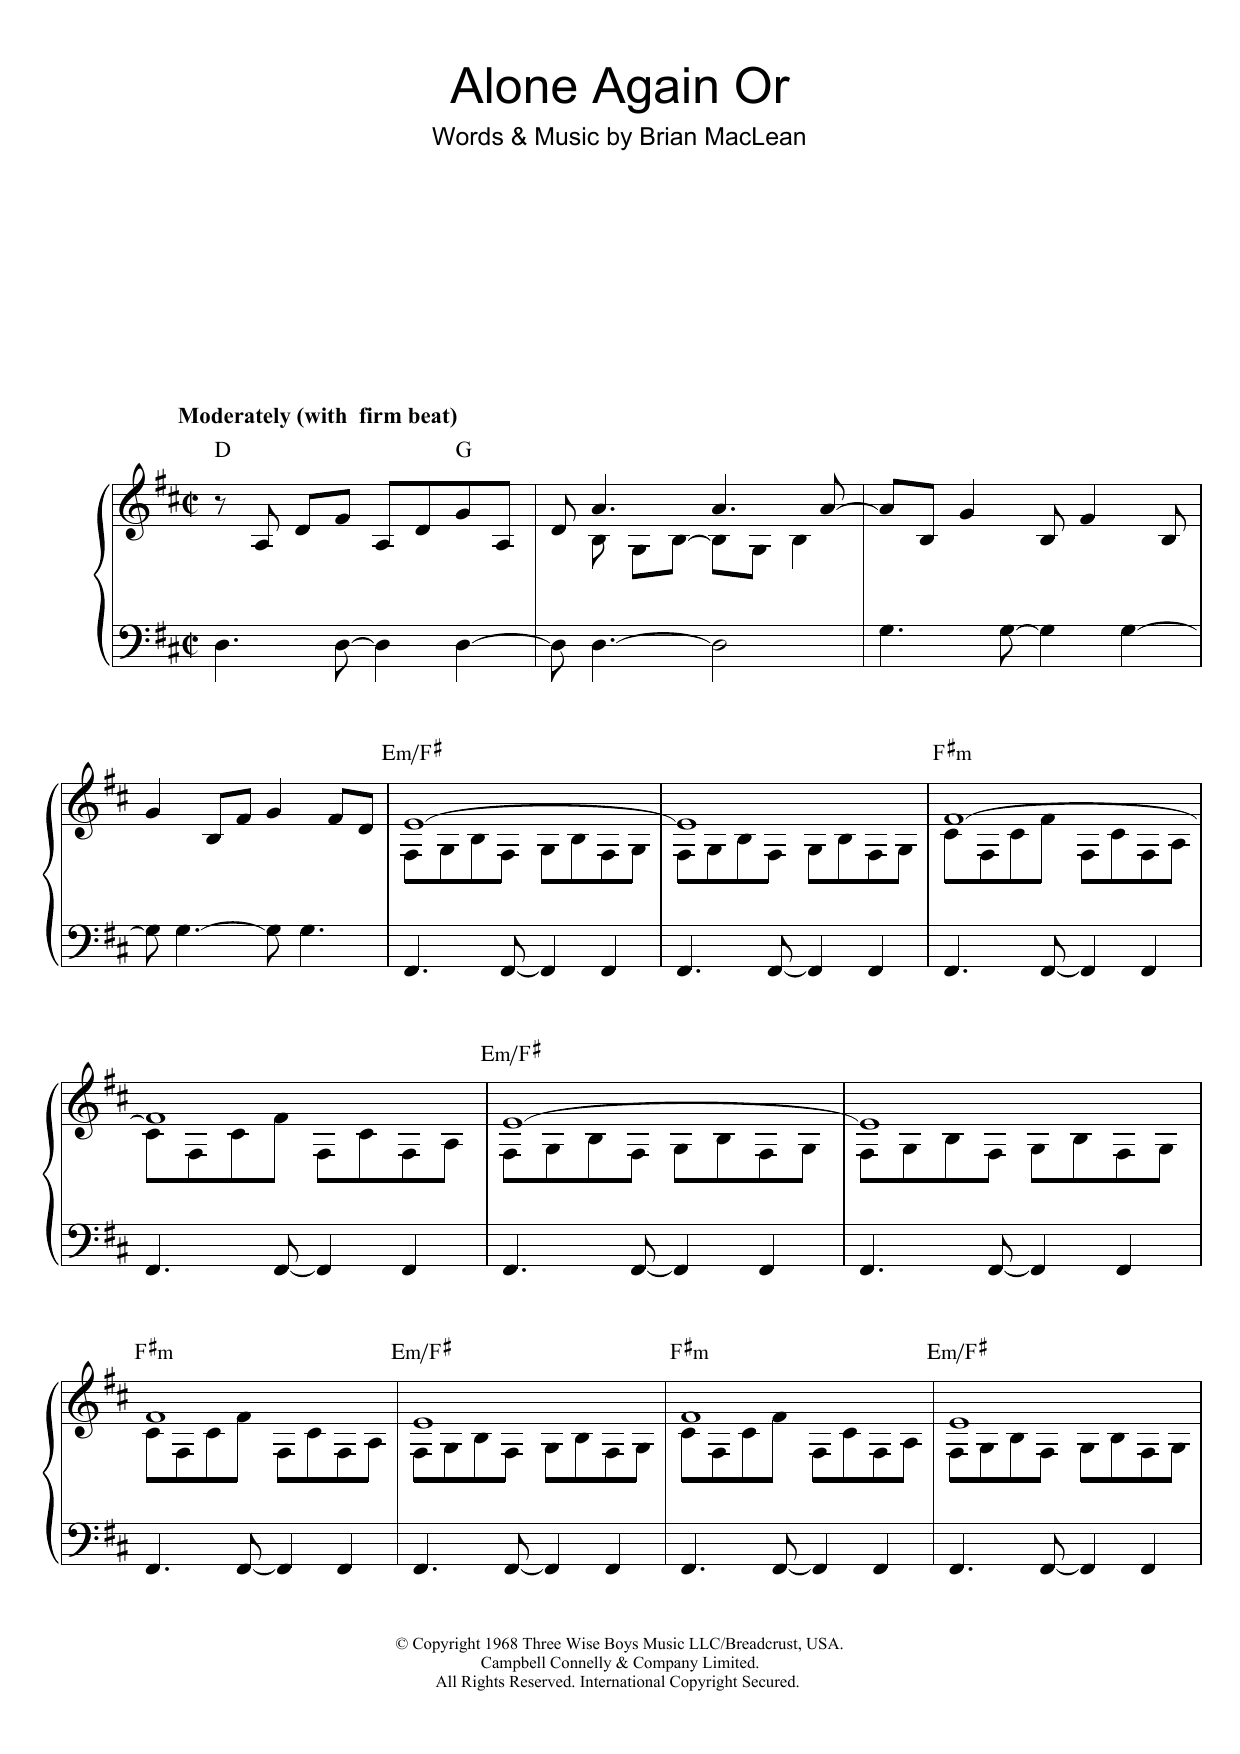 Download Love Alone Again Or Sheet Music